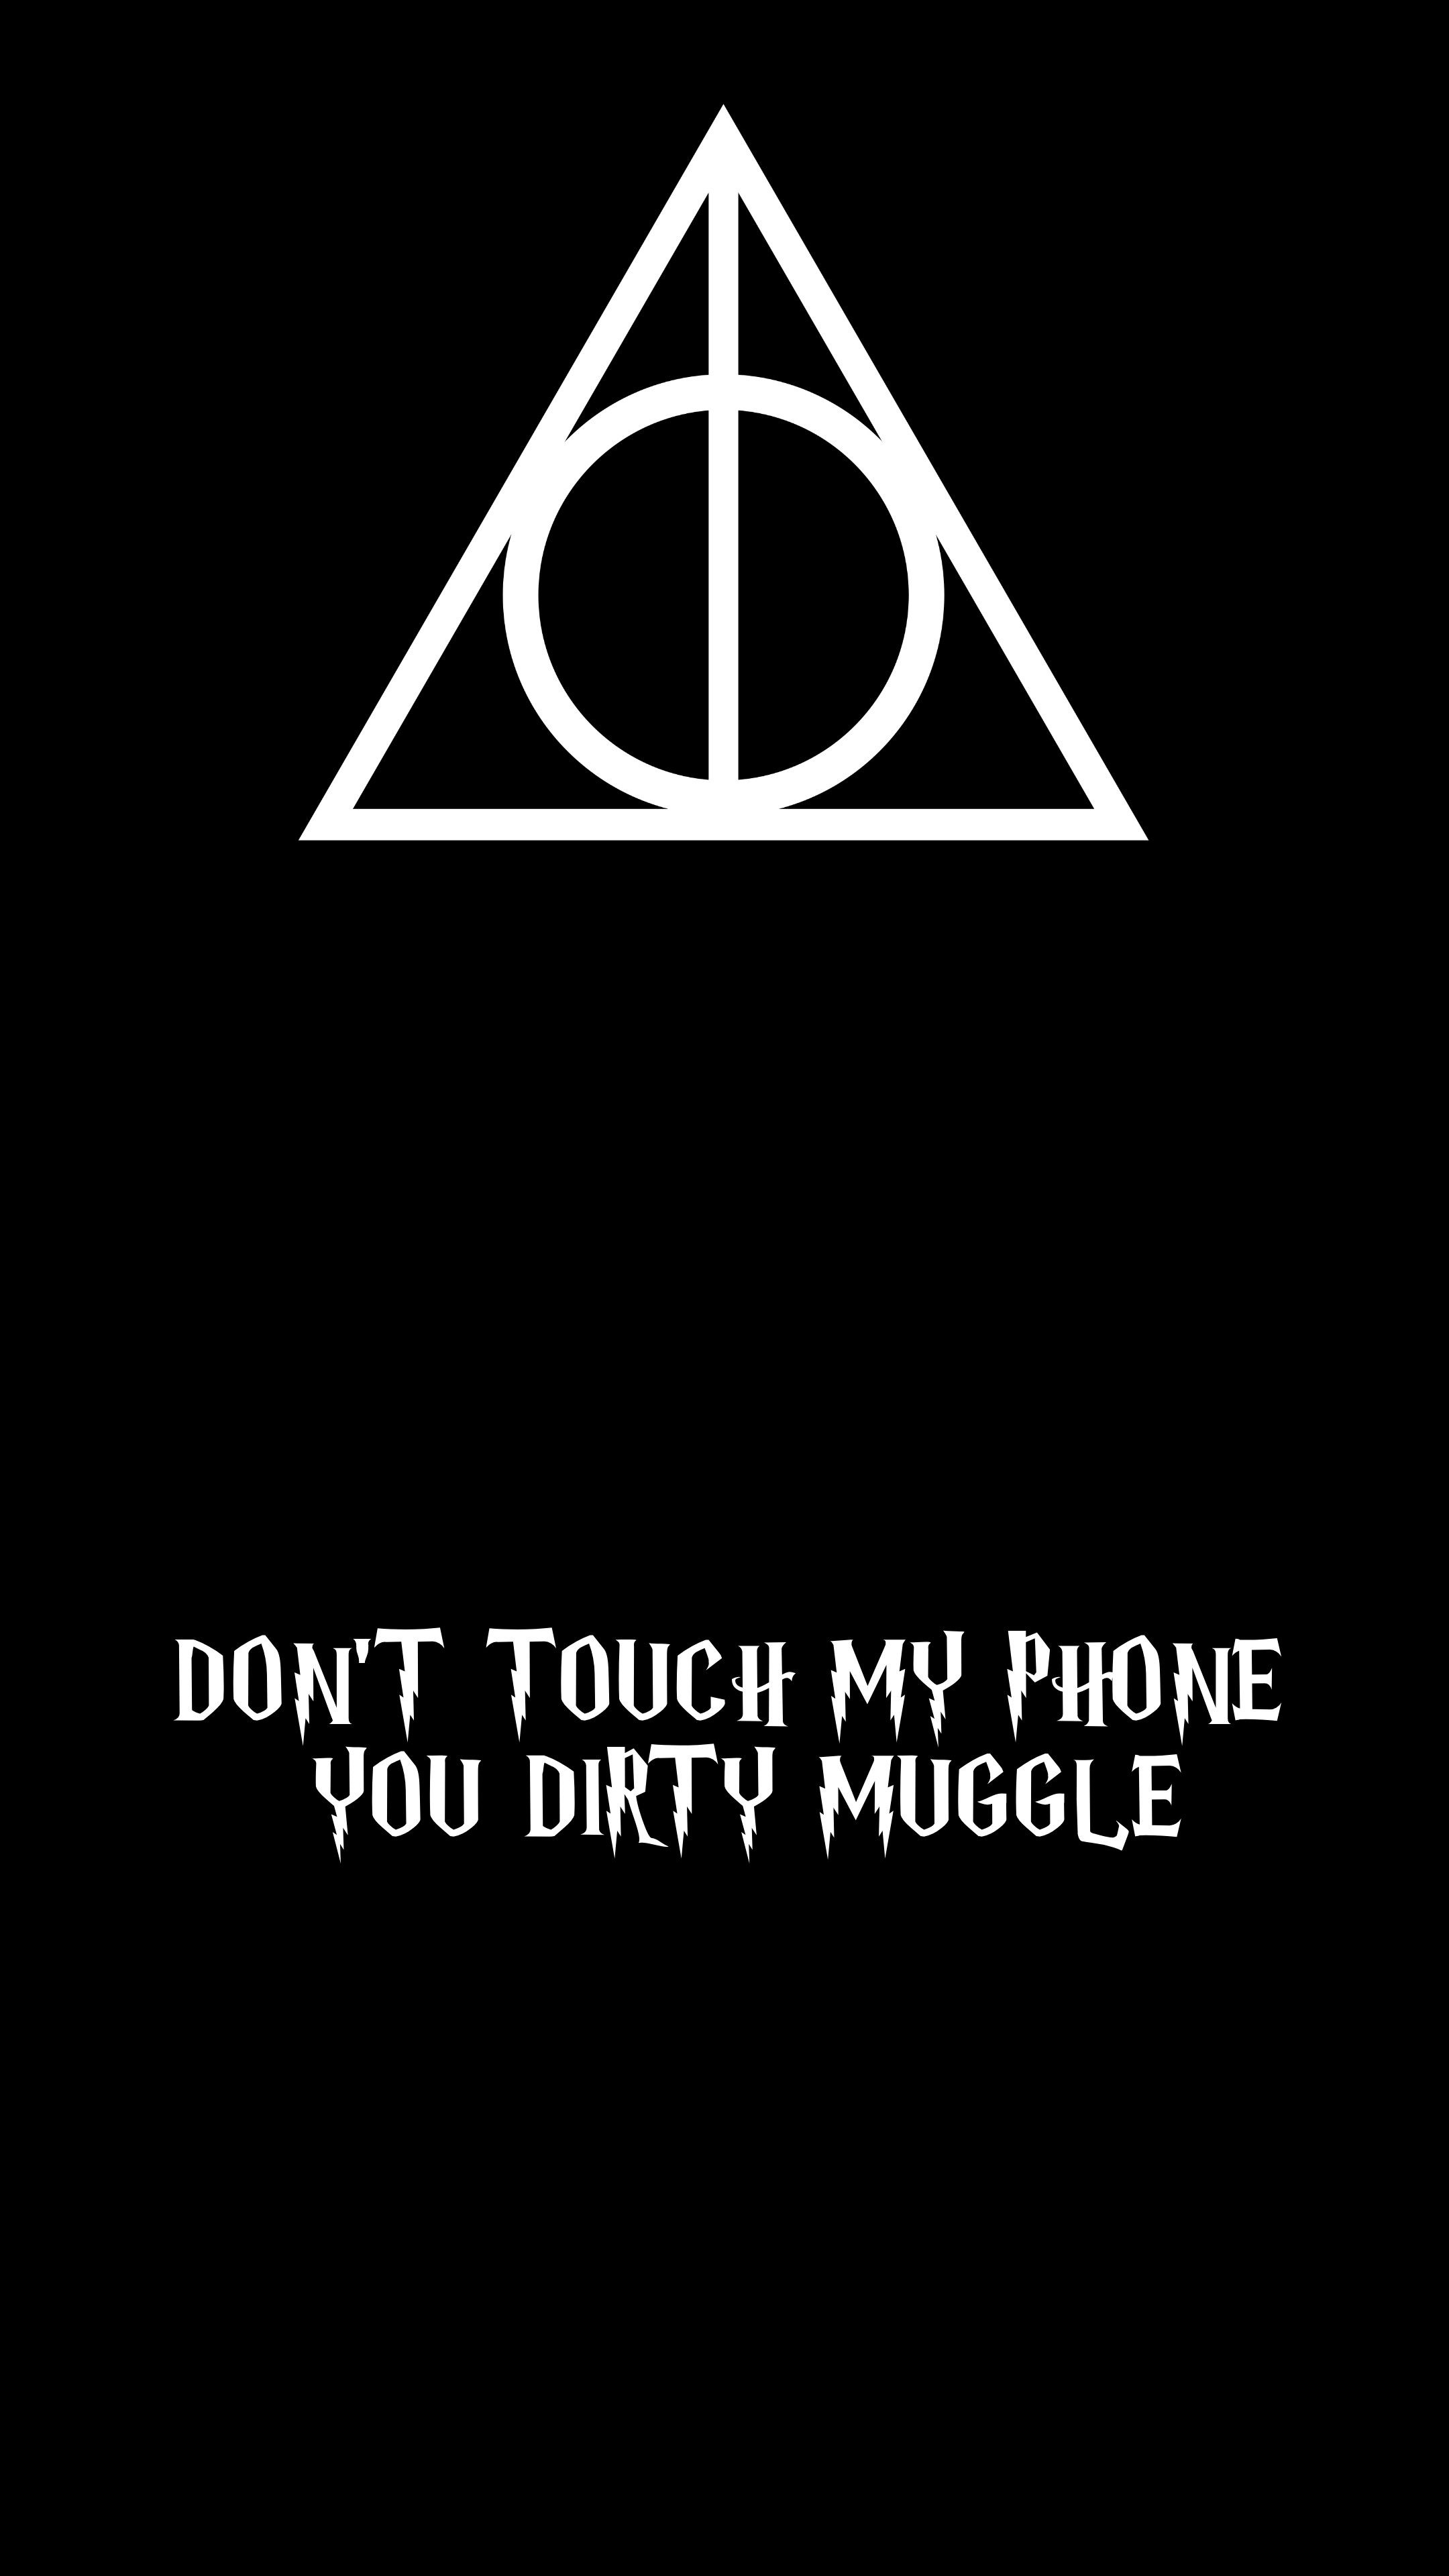 Harry Potter Symbols Black and White Wallpapers on